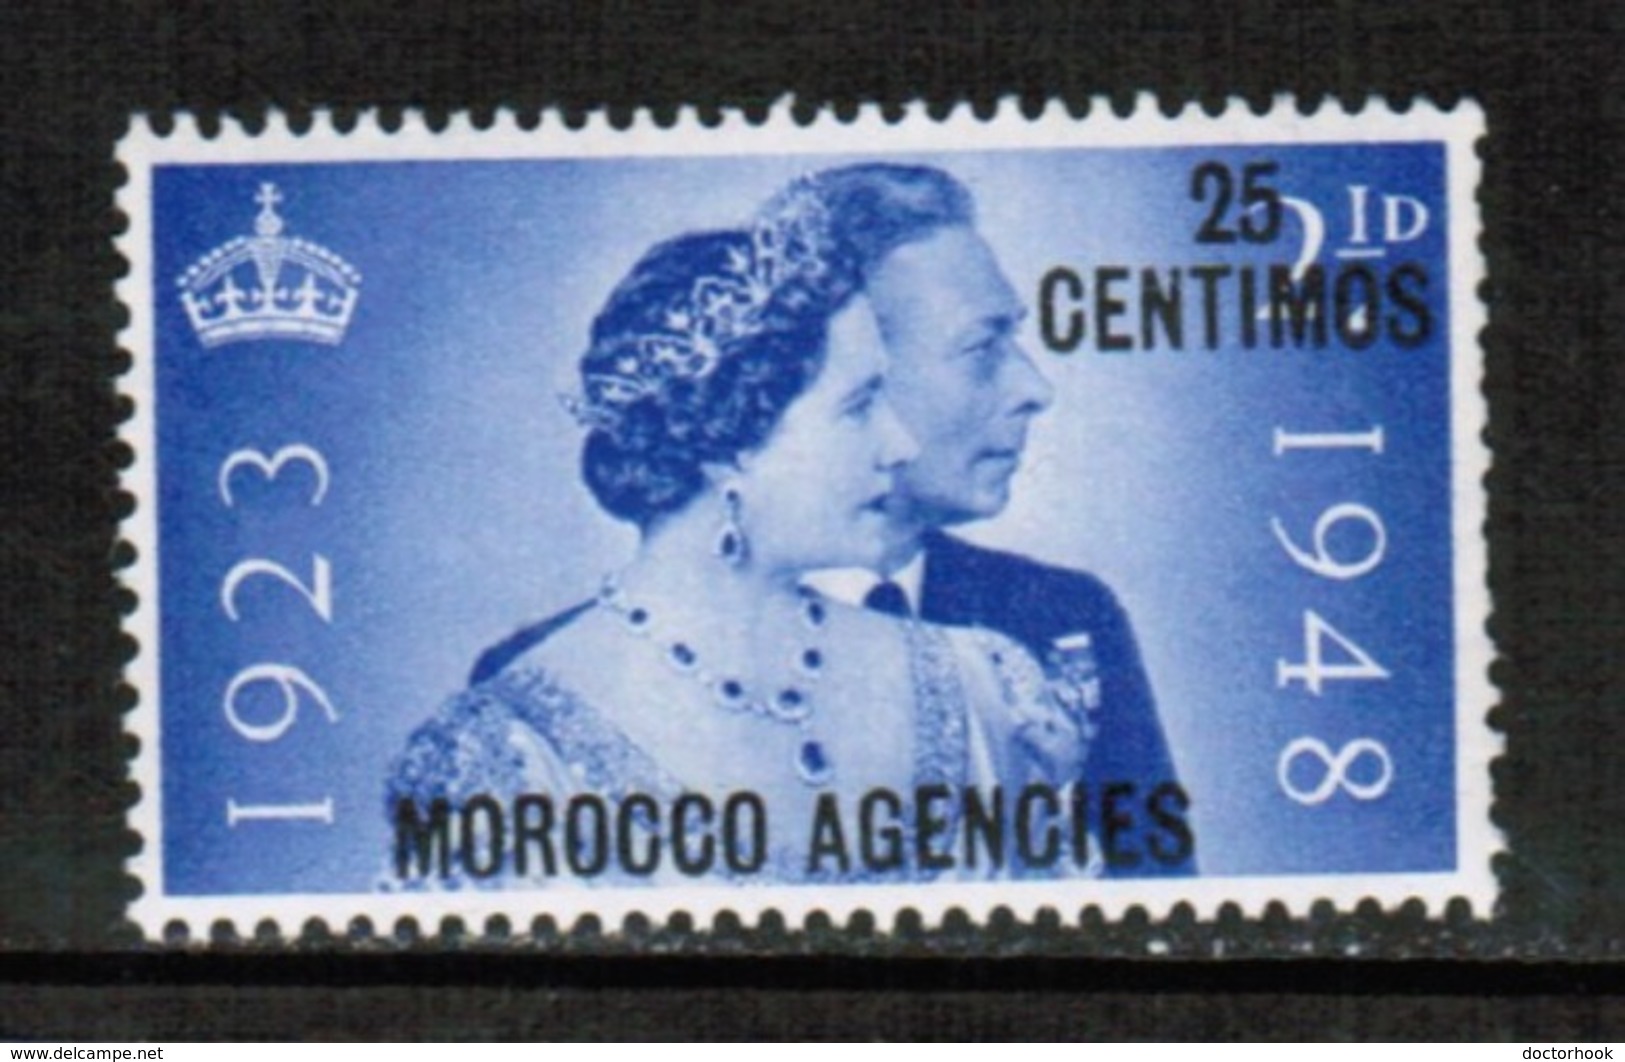 GREAT BRITAIN---Offices In Morocco  Scott # 93** VF MINT NH  (Stamp Scan # 525) - Morocco Agencies / Tangier (...-1958)